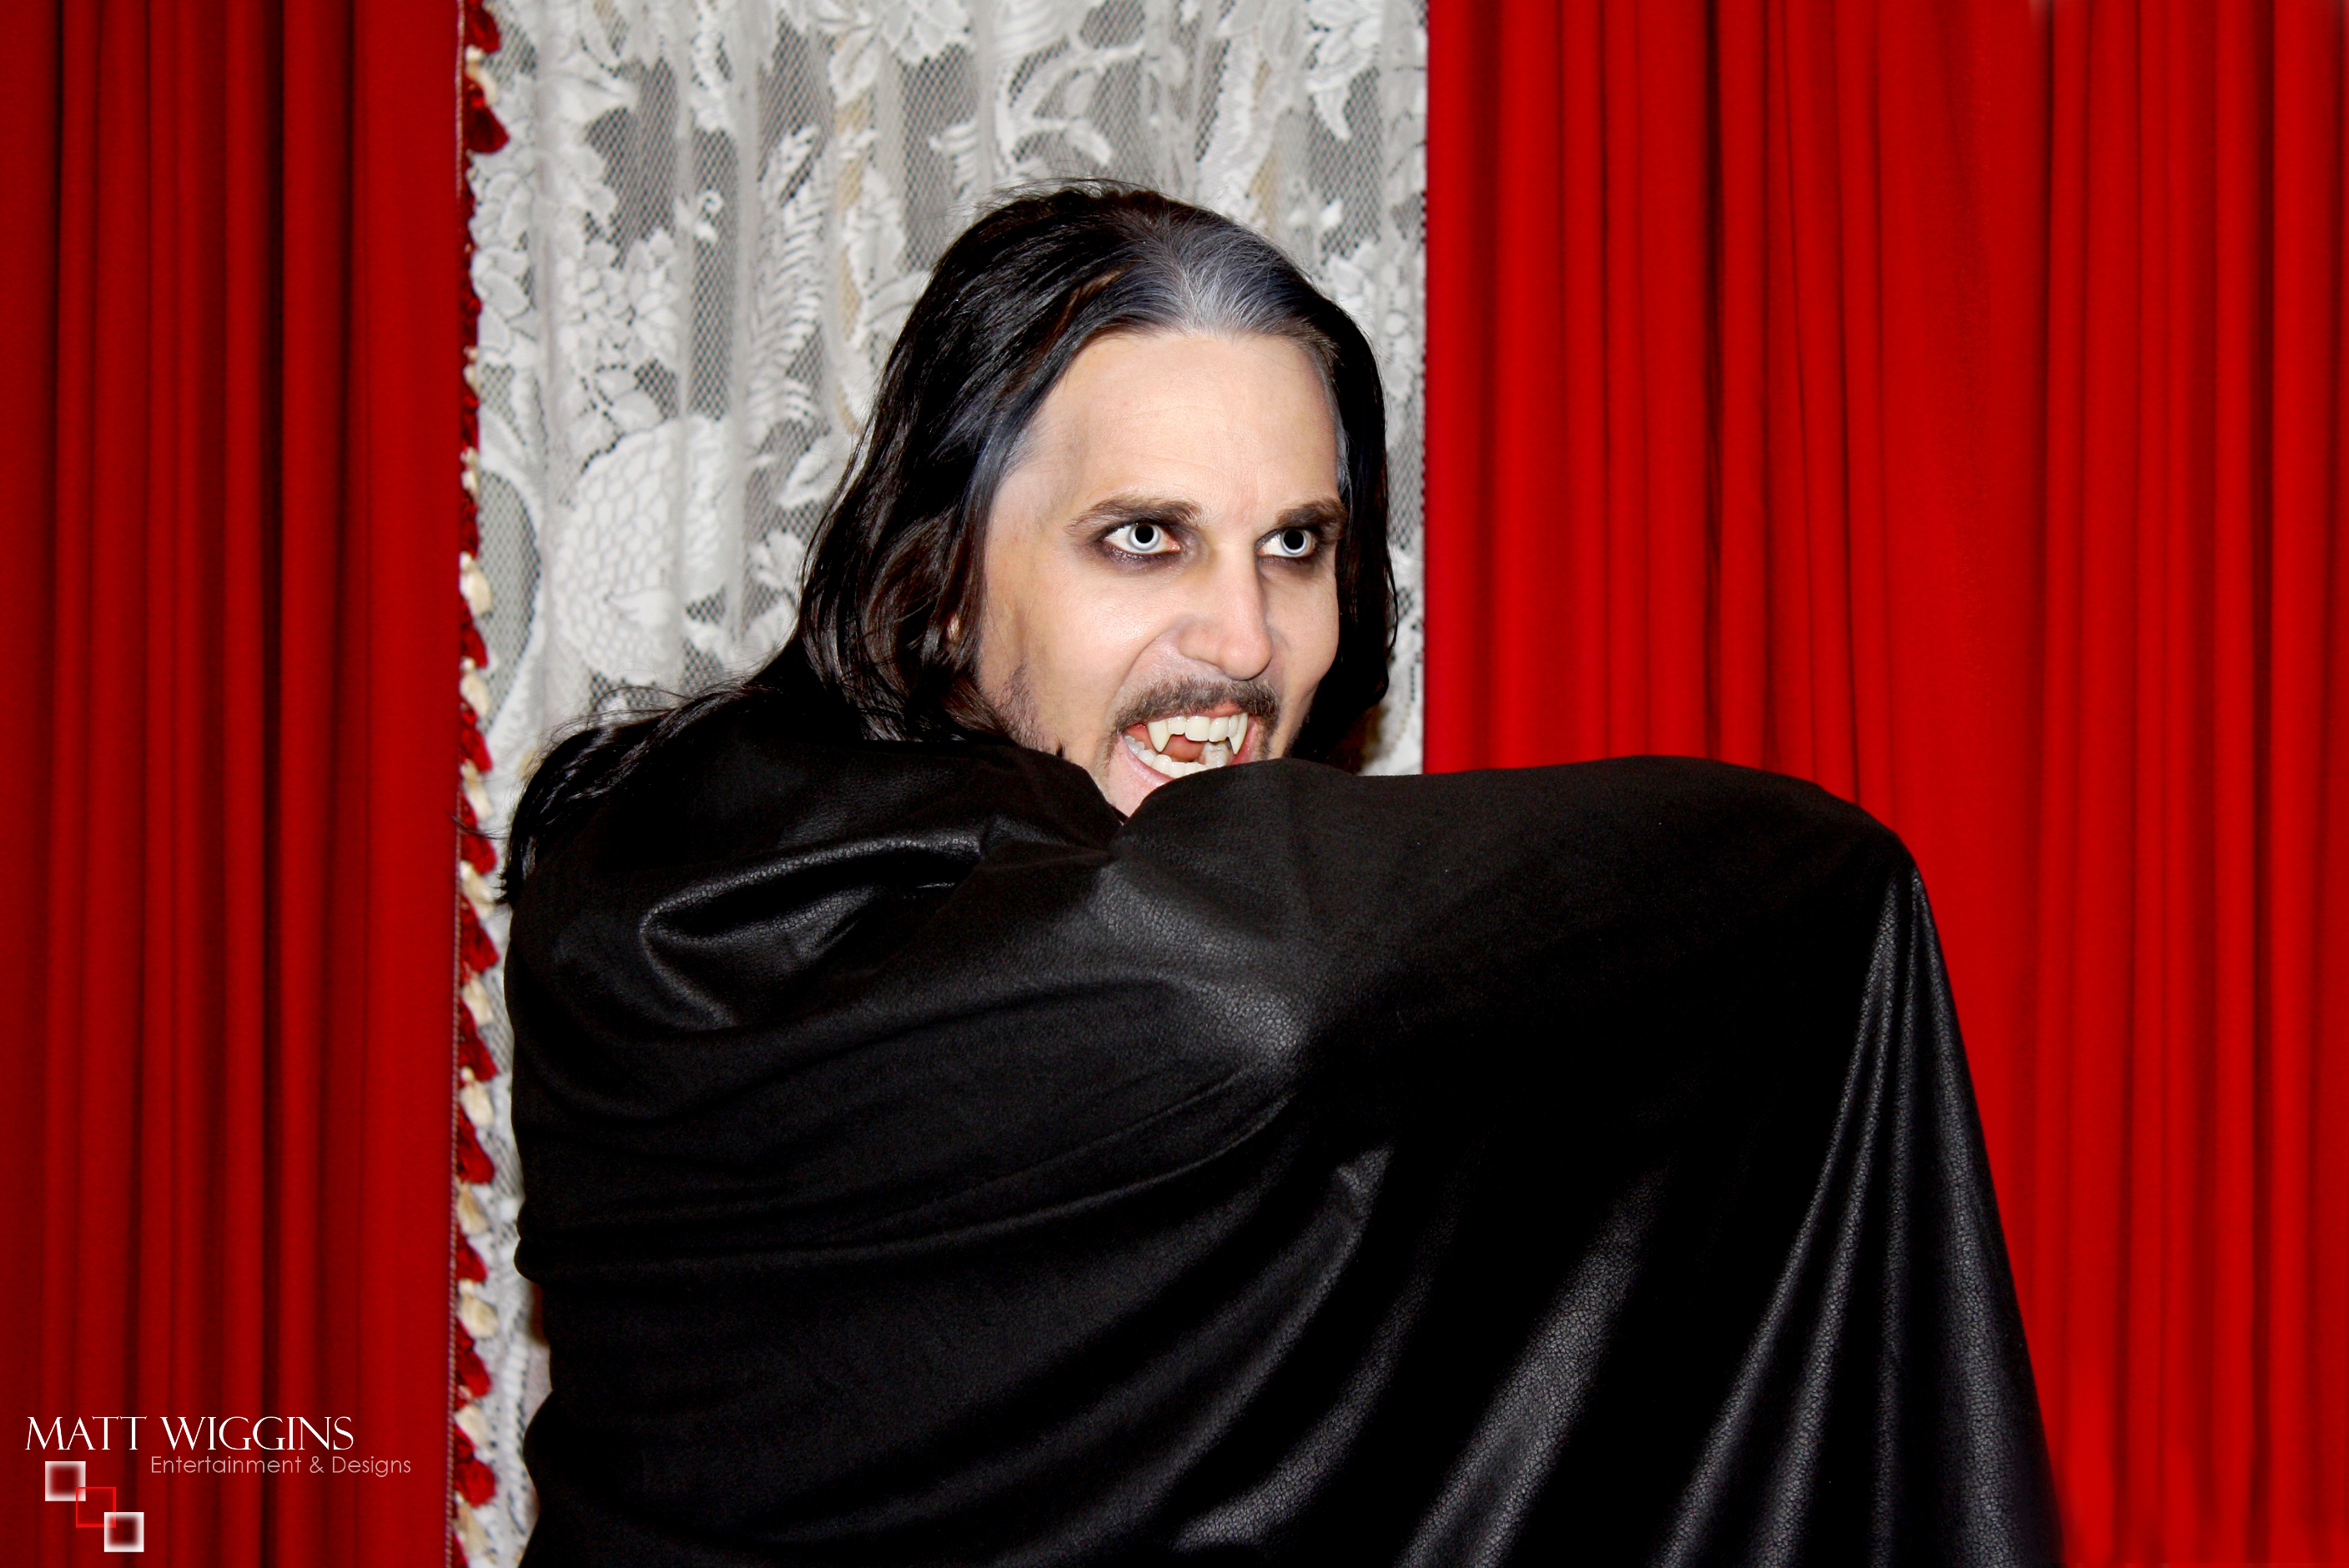 Production photo of Matt Wiggins as Dracula in 2013. Matt has confirmed he will reprise his role as Dracula in October 2014.